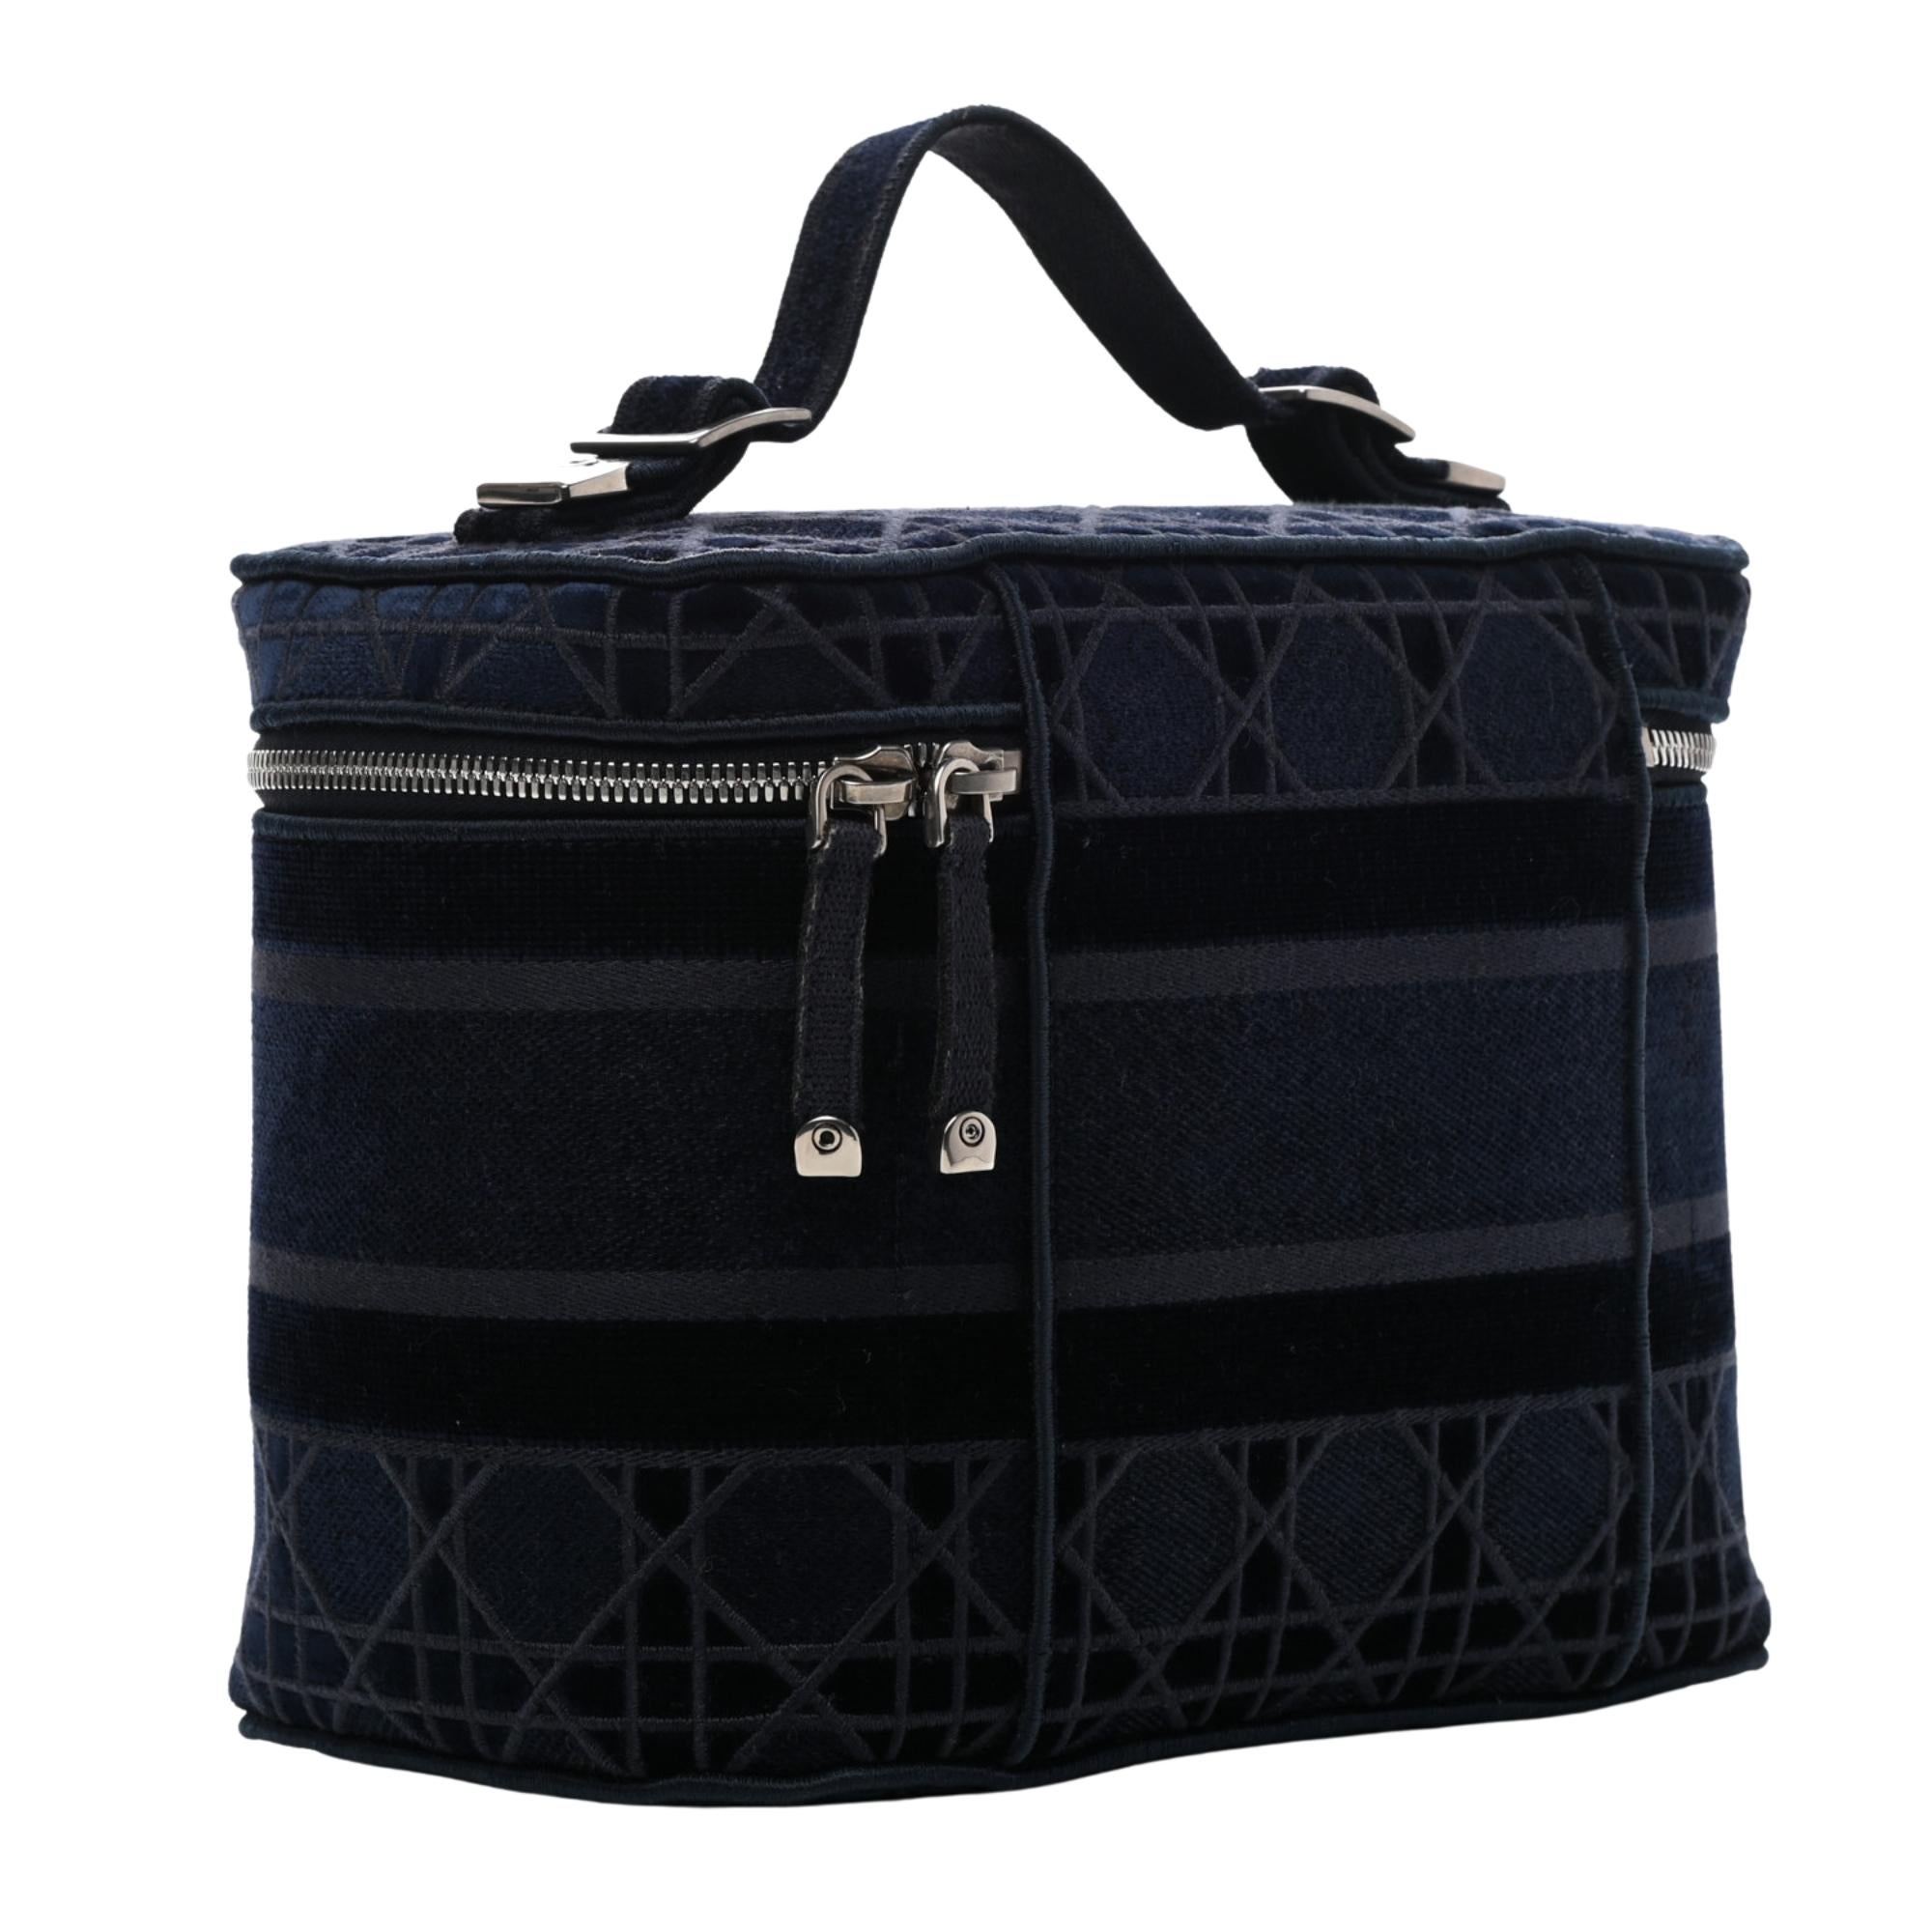 This beauty case is constructed of embroidered navy Cannage canvas with a 'Christian Dior' signature on the front. The bag features a top handle and bold silver hardware. The zipper opens to a matching interior with flat patch pockets.

Color: